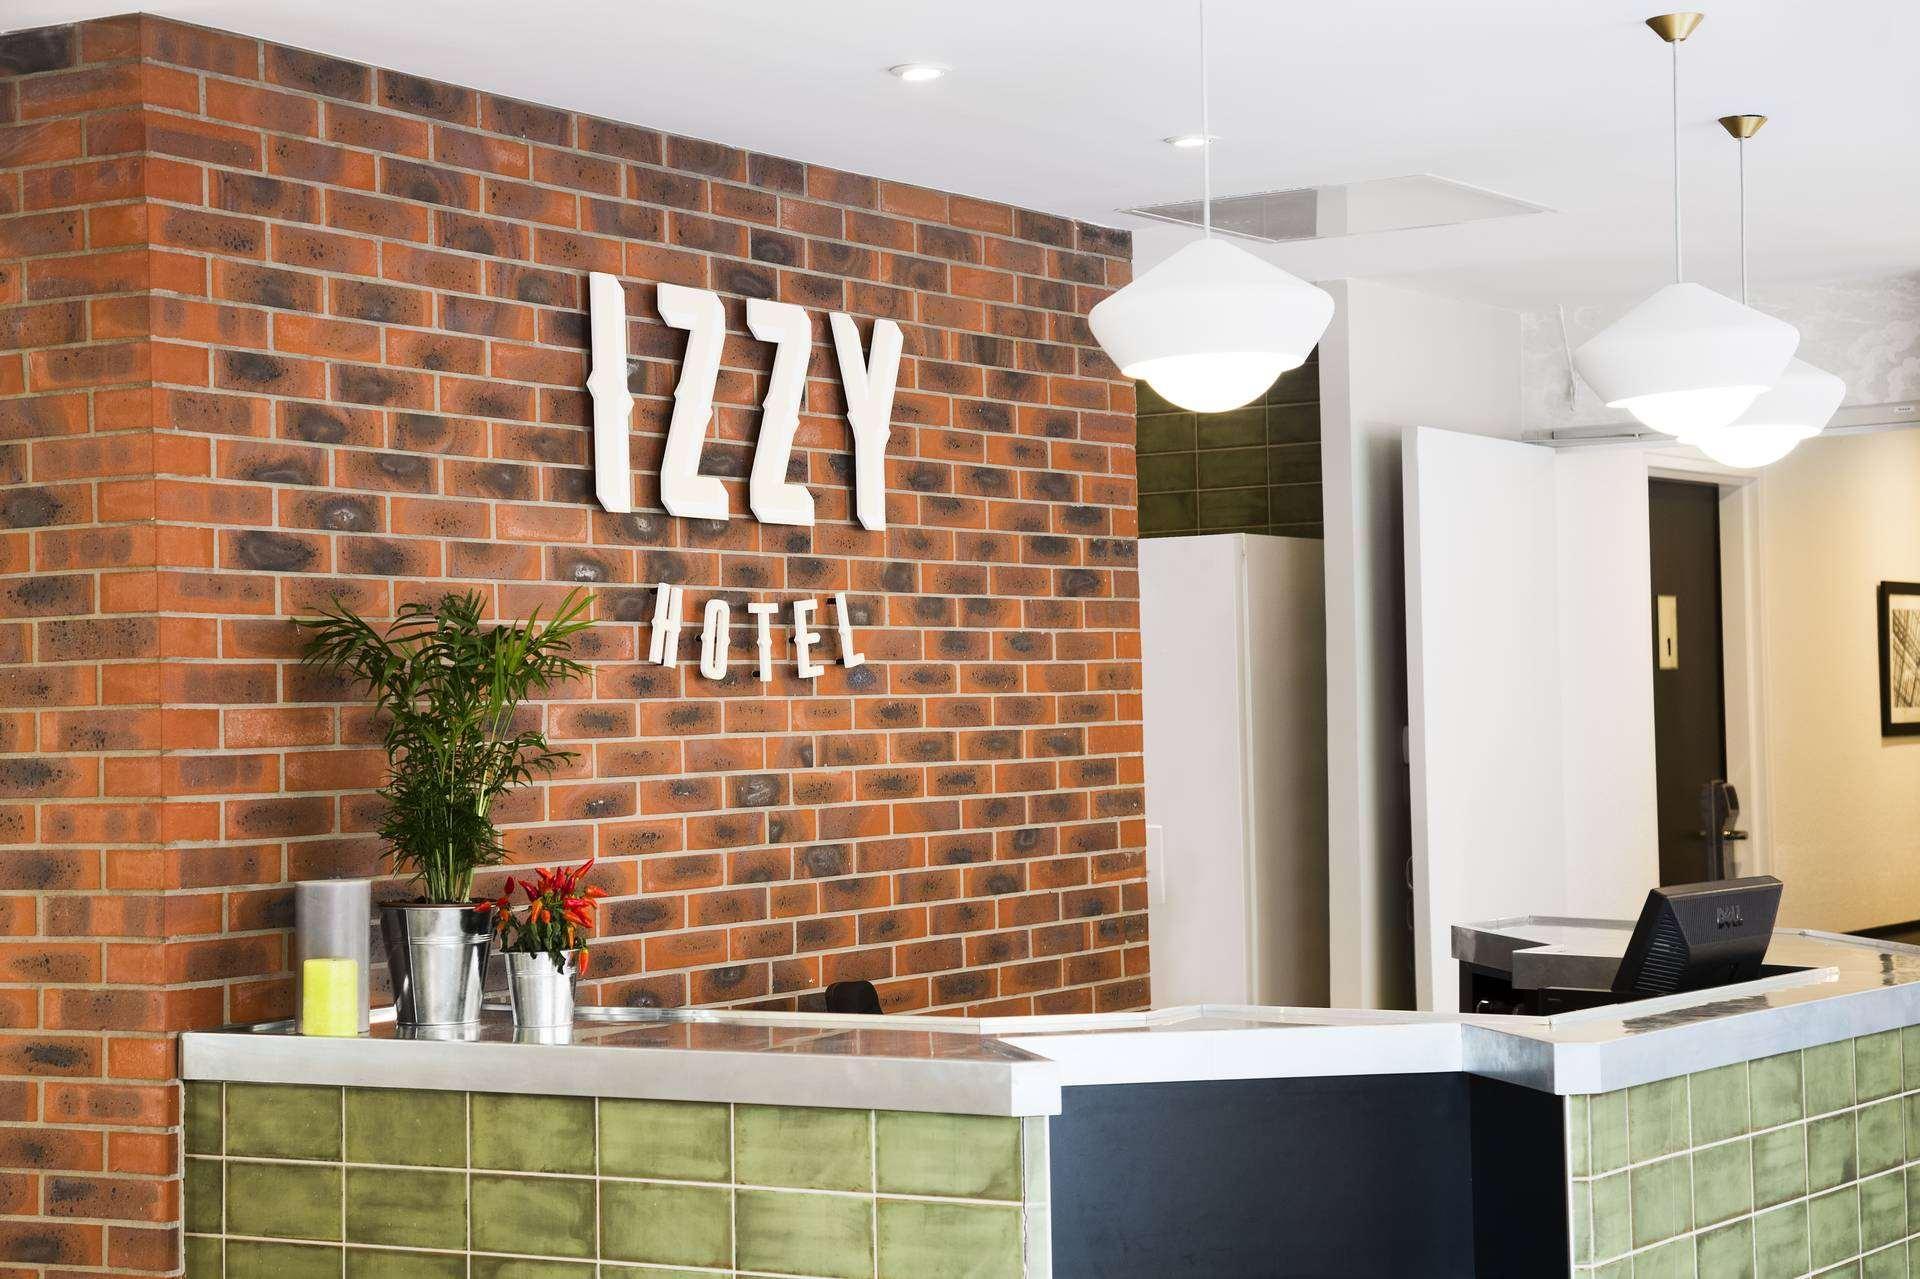 Hotel Izzy Issy-les-Moulineaux Exterior foto